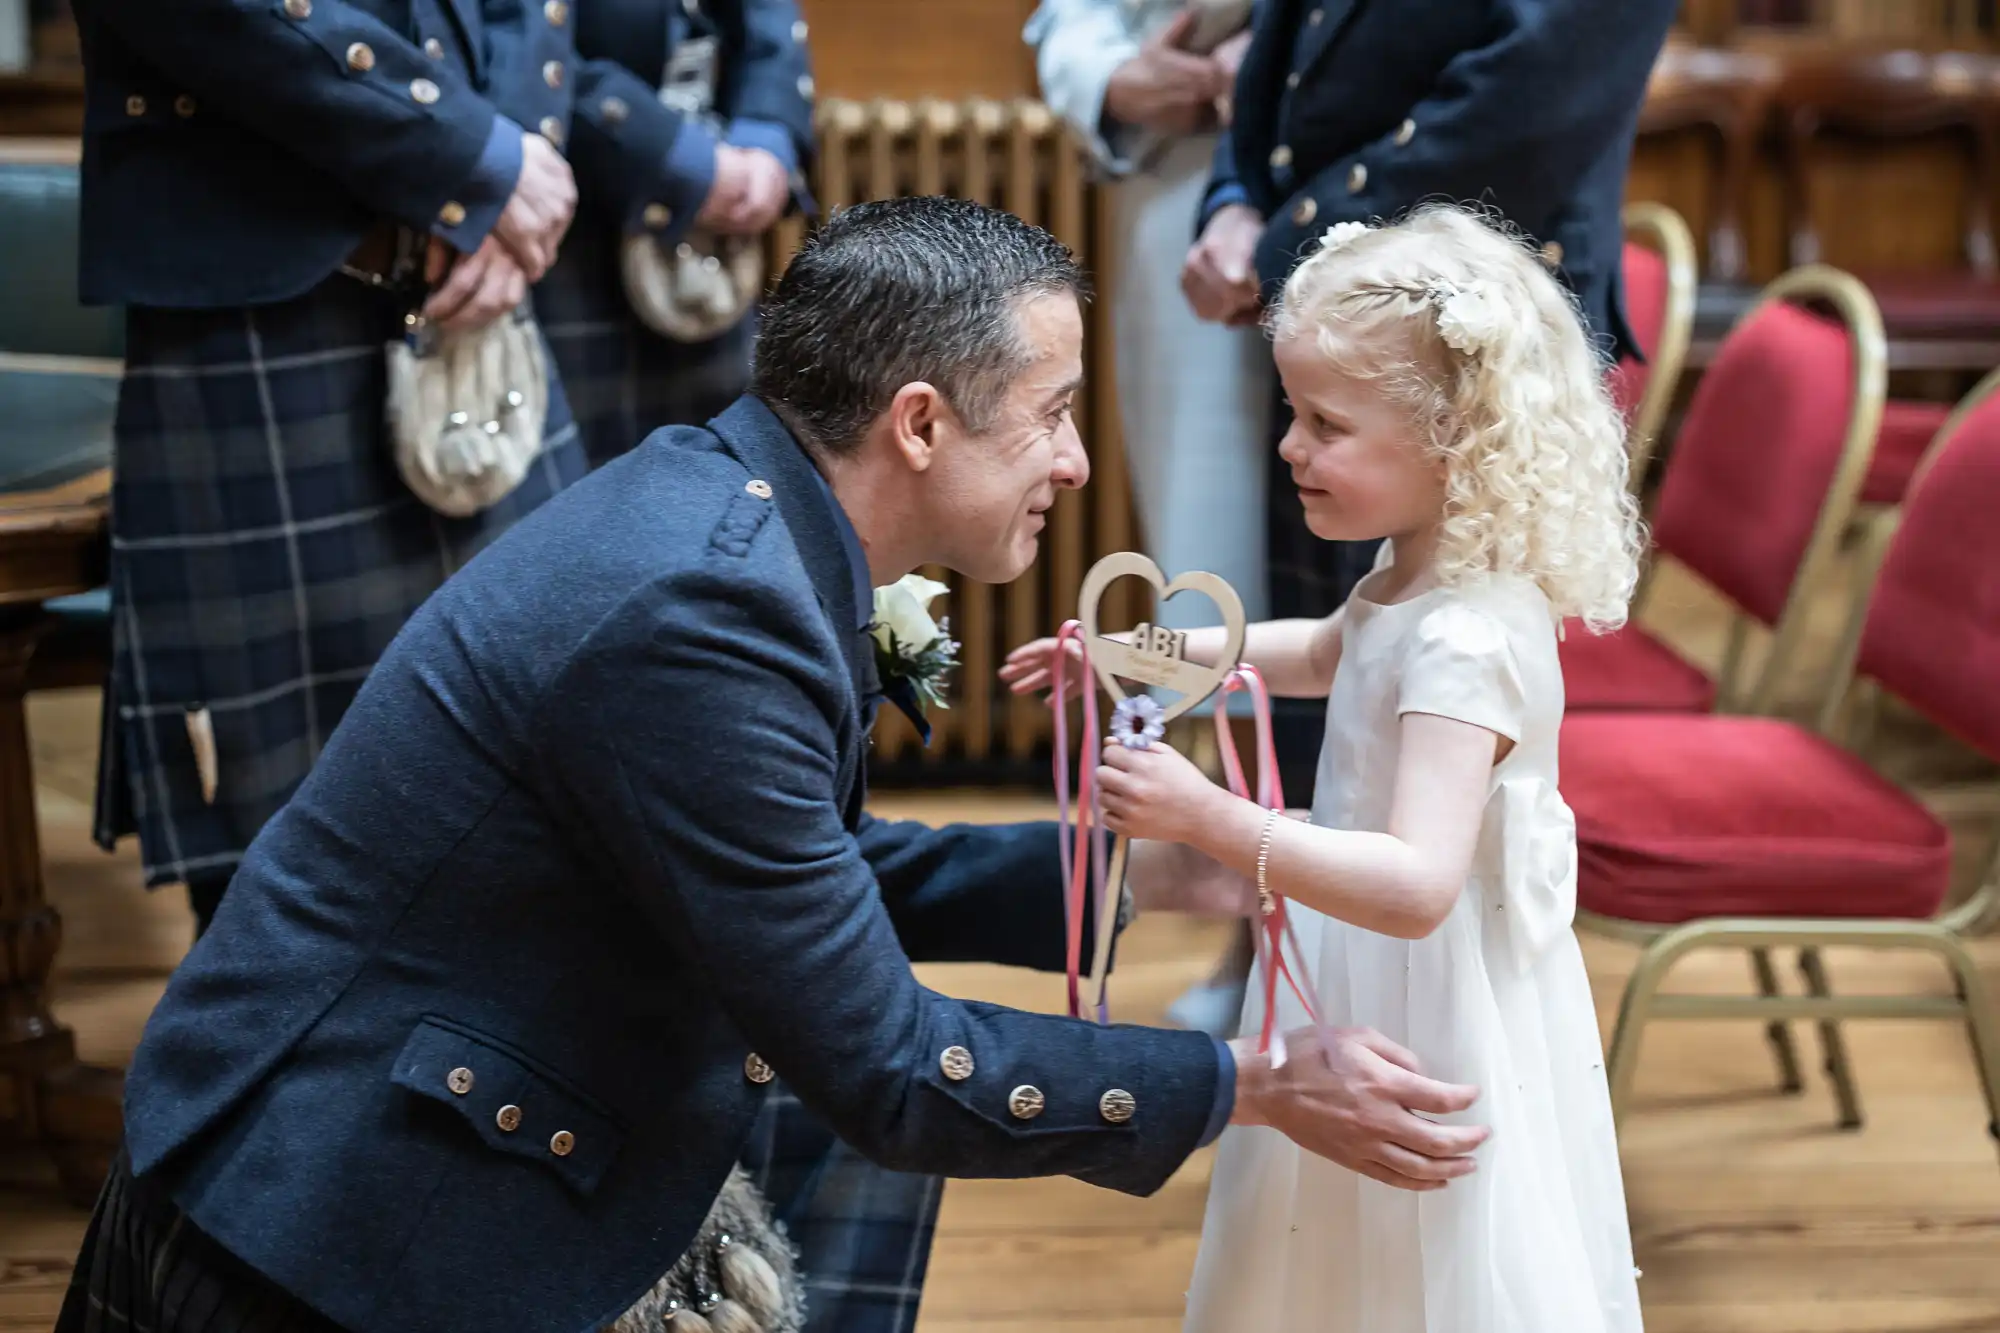 A man in a blue jacket kneels and smiles at a young girl in a white dress holding a wooden heart-shaped ring bearer box with ribbons. Both are about to present or receive something in a formal setting.